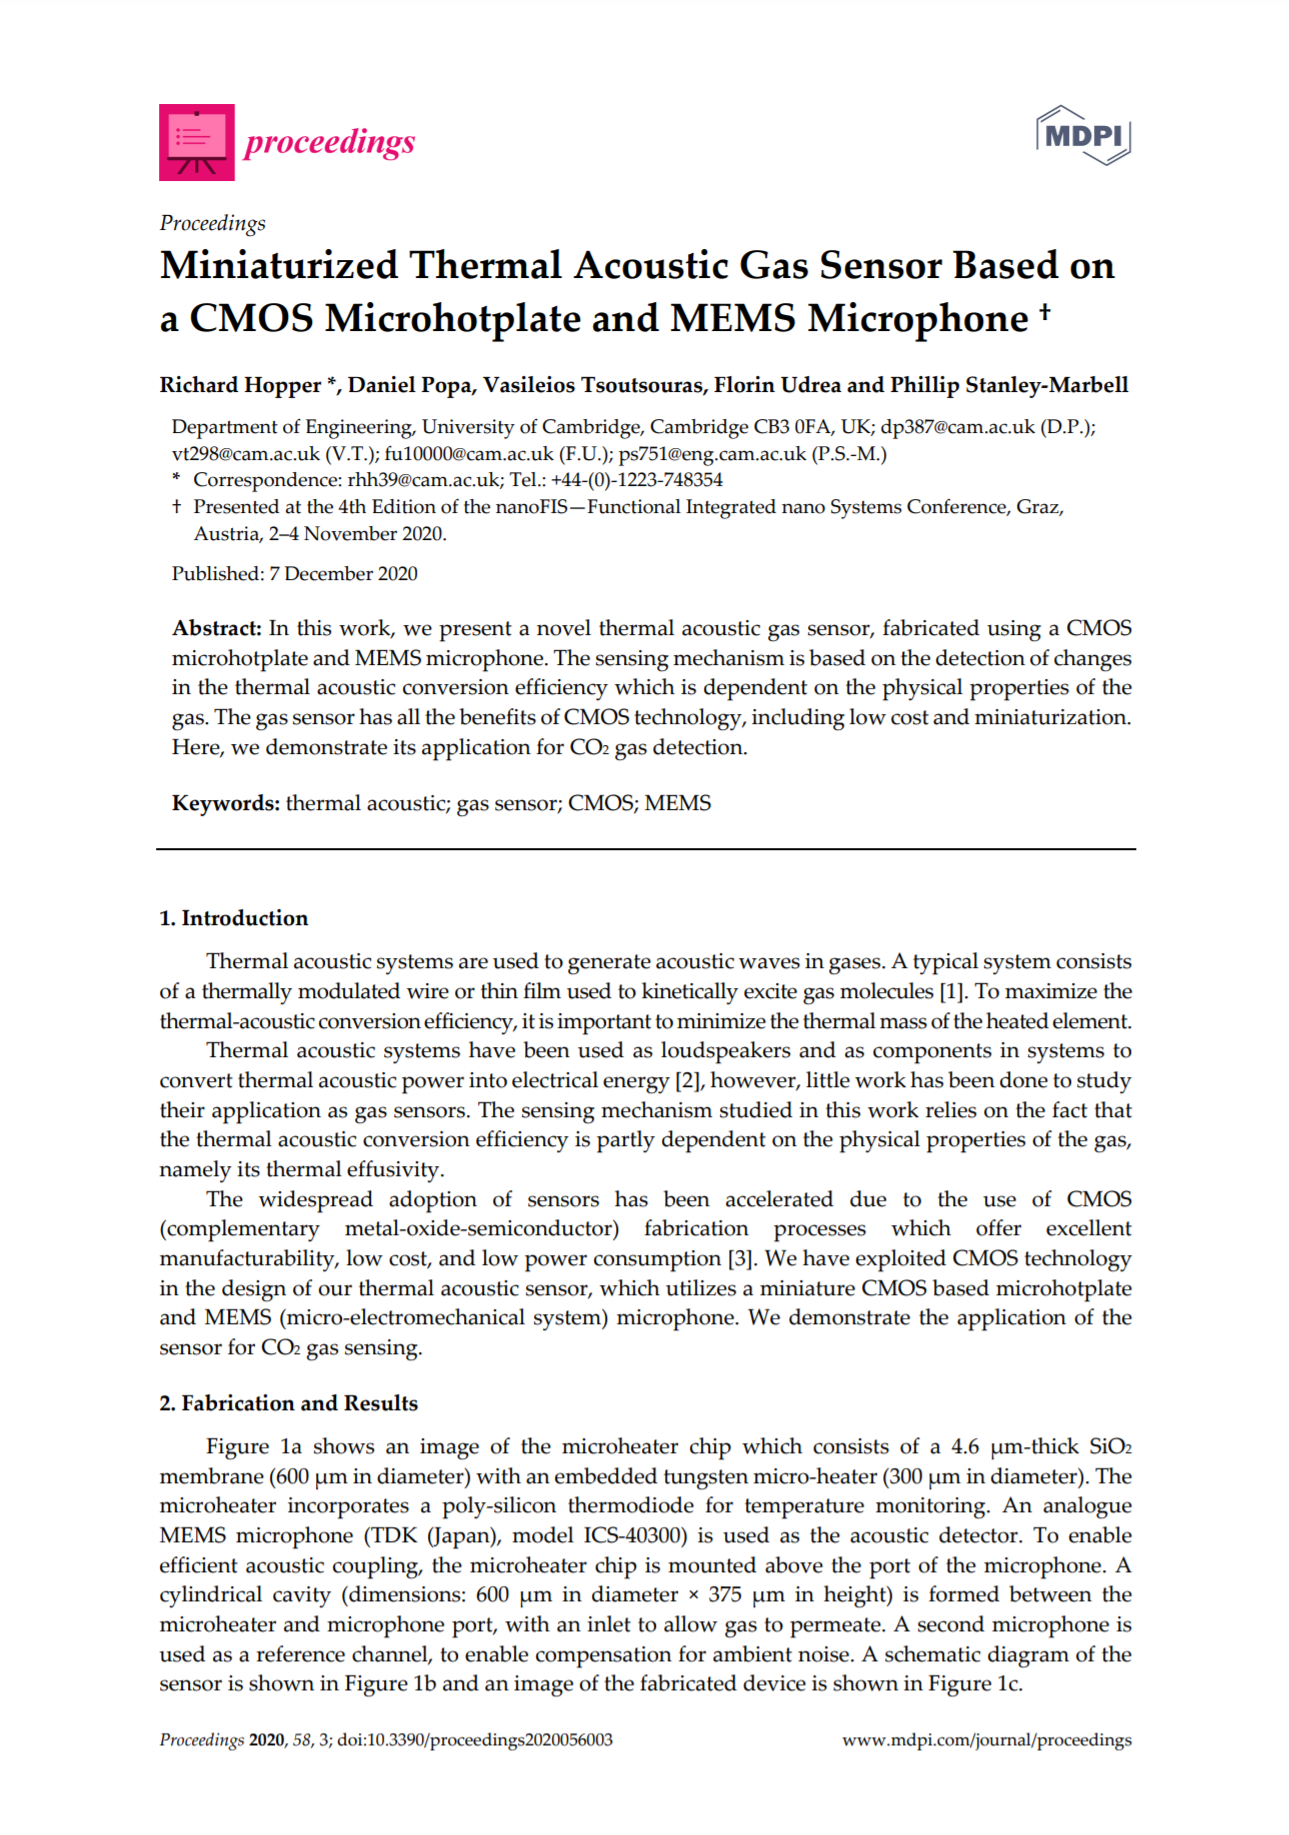 Miniaturized Thermal Acoustic Gas Sensor Based on a CMOS Microhotplate and MEMS Microphone